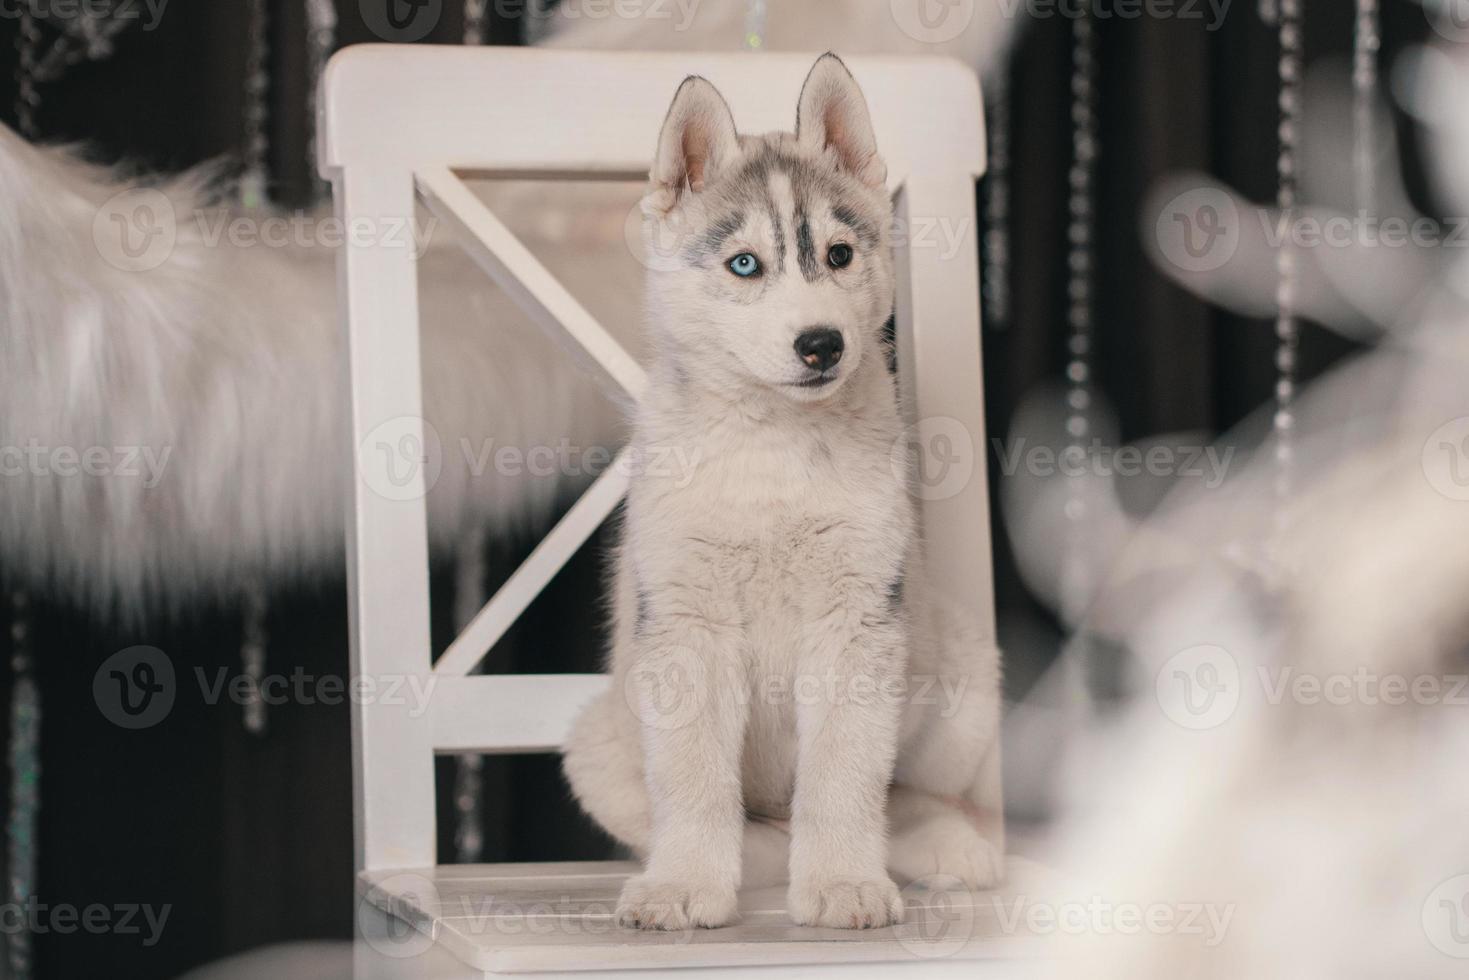 husky puppy sitting on a white chair against a background of a ring of white faux fur photo